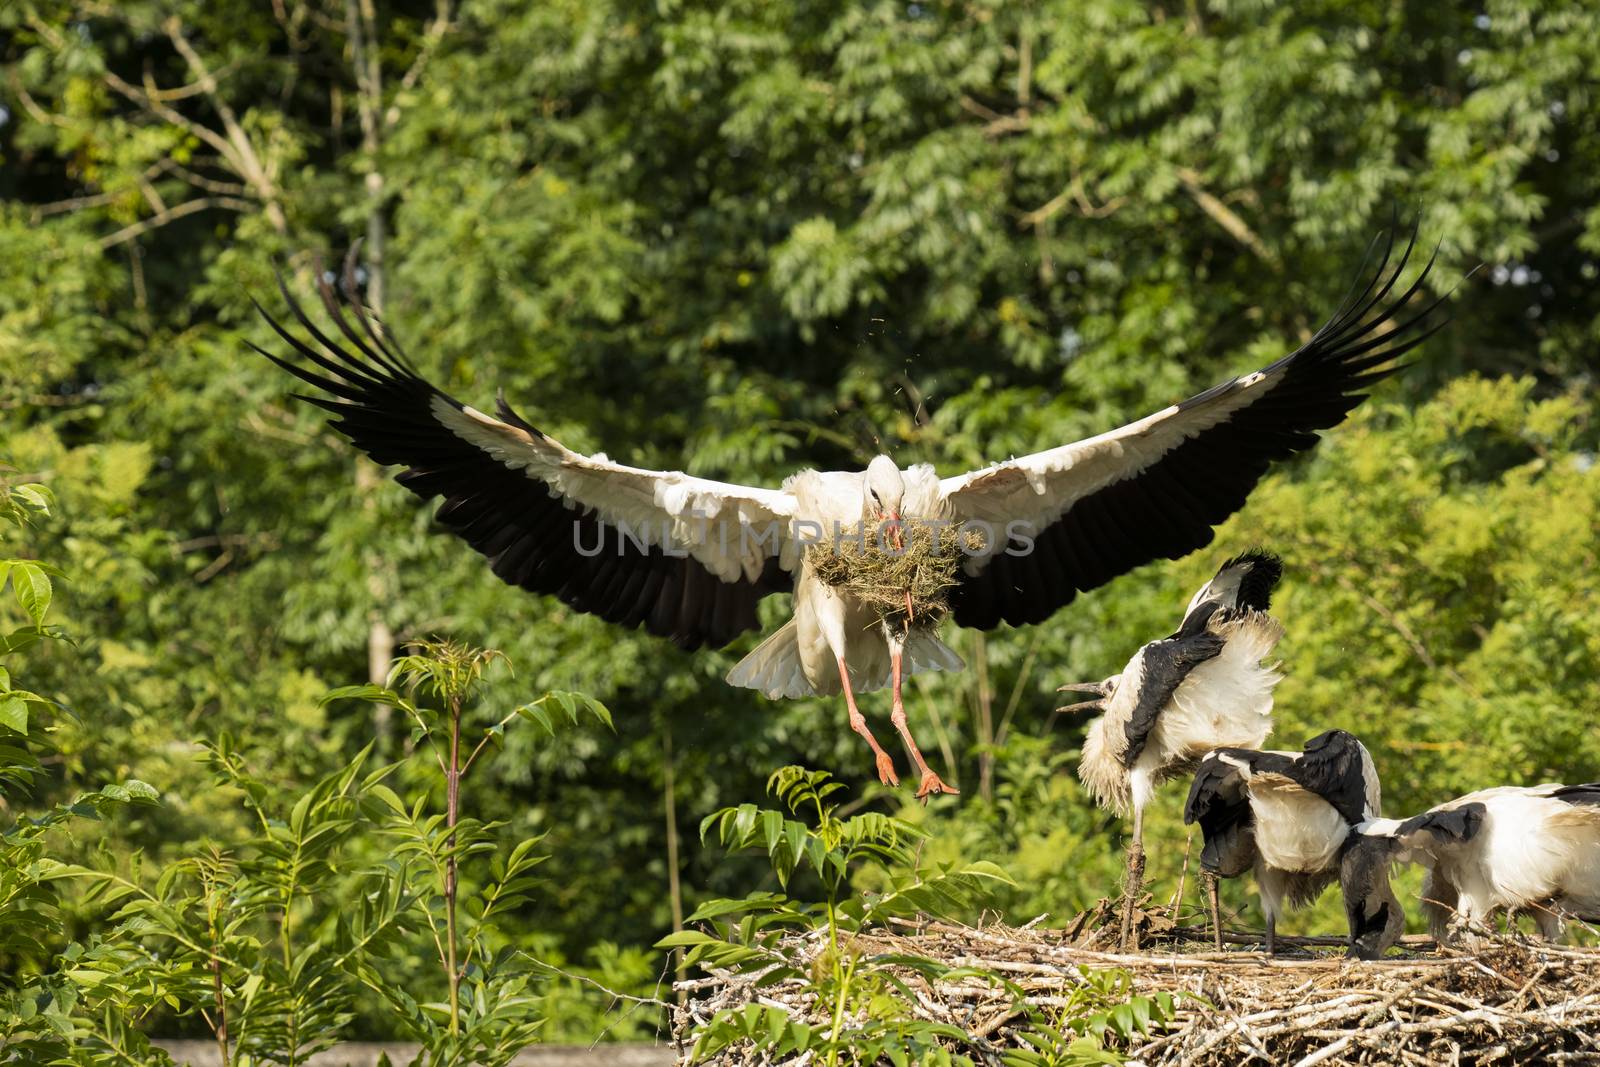 Sstork landing at nest with food for young